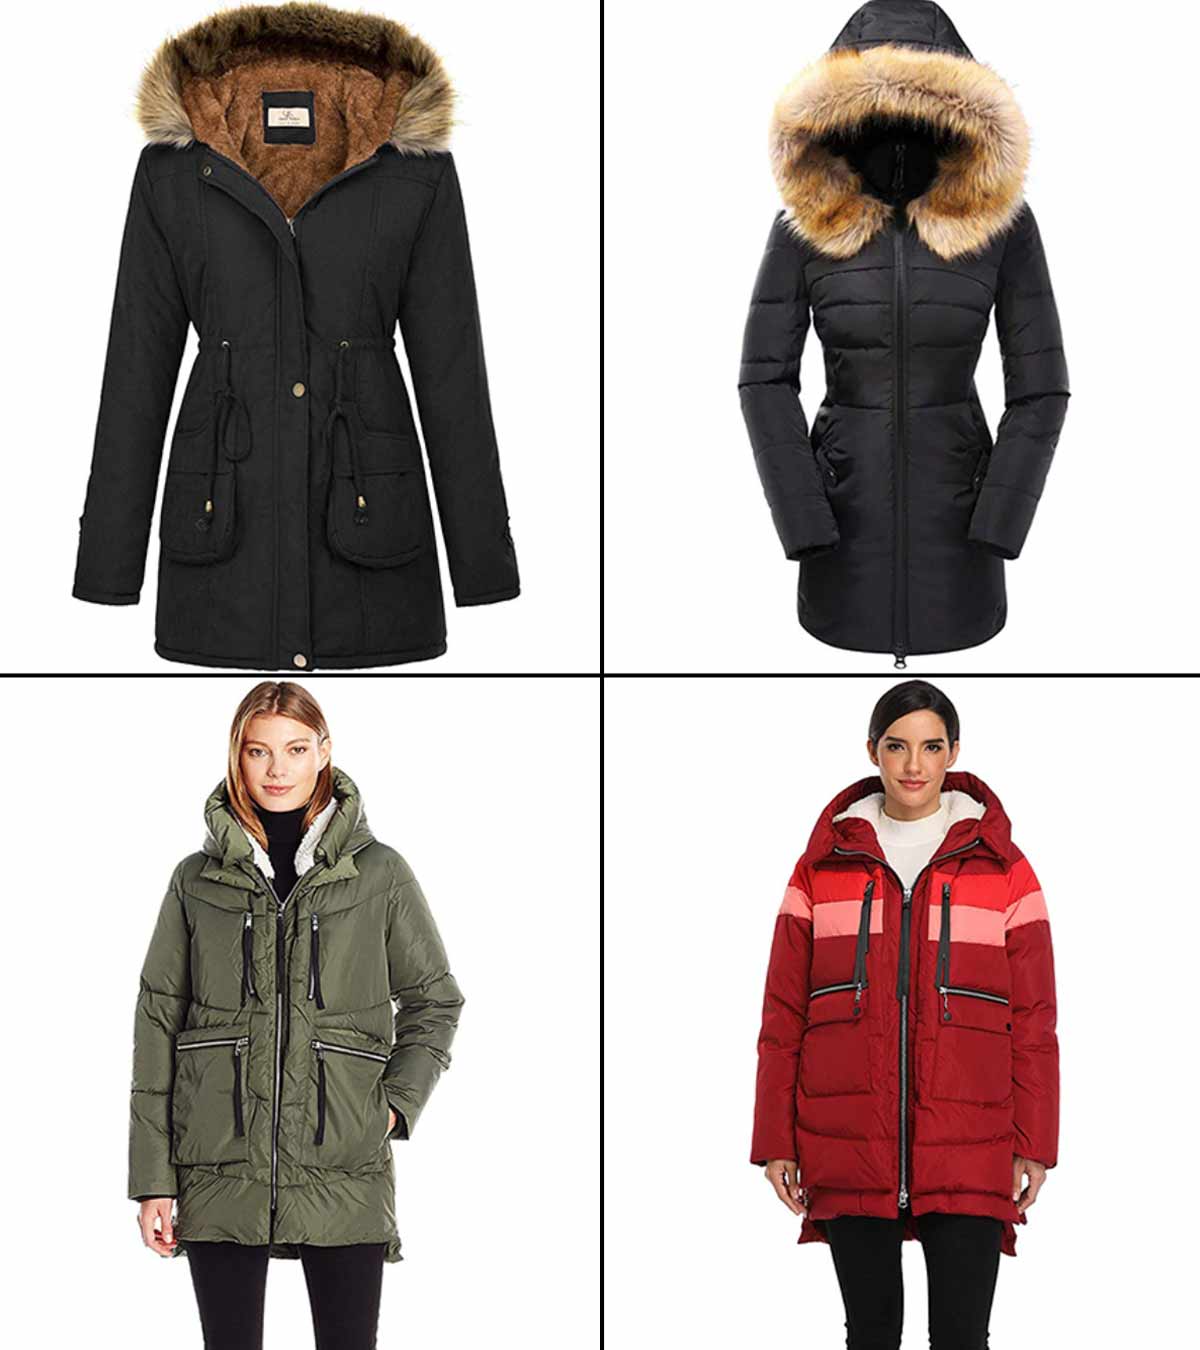 YXP Womens Winter Thicken Military Parka Jacket Warm Fleece Cotton Coat with Removable Hood